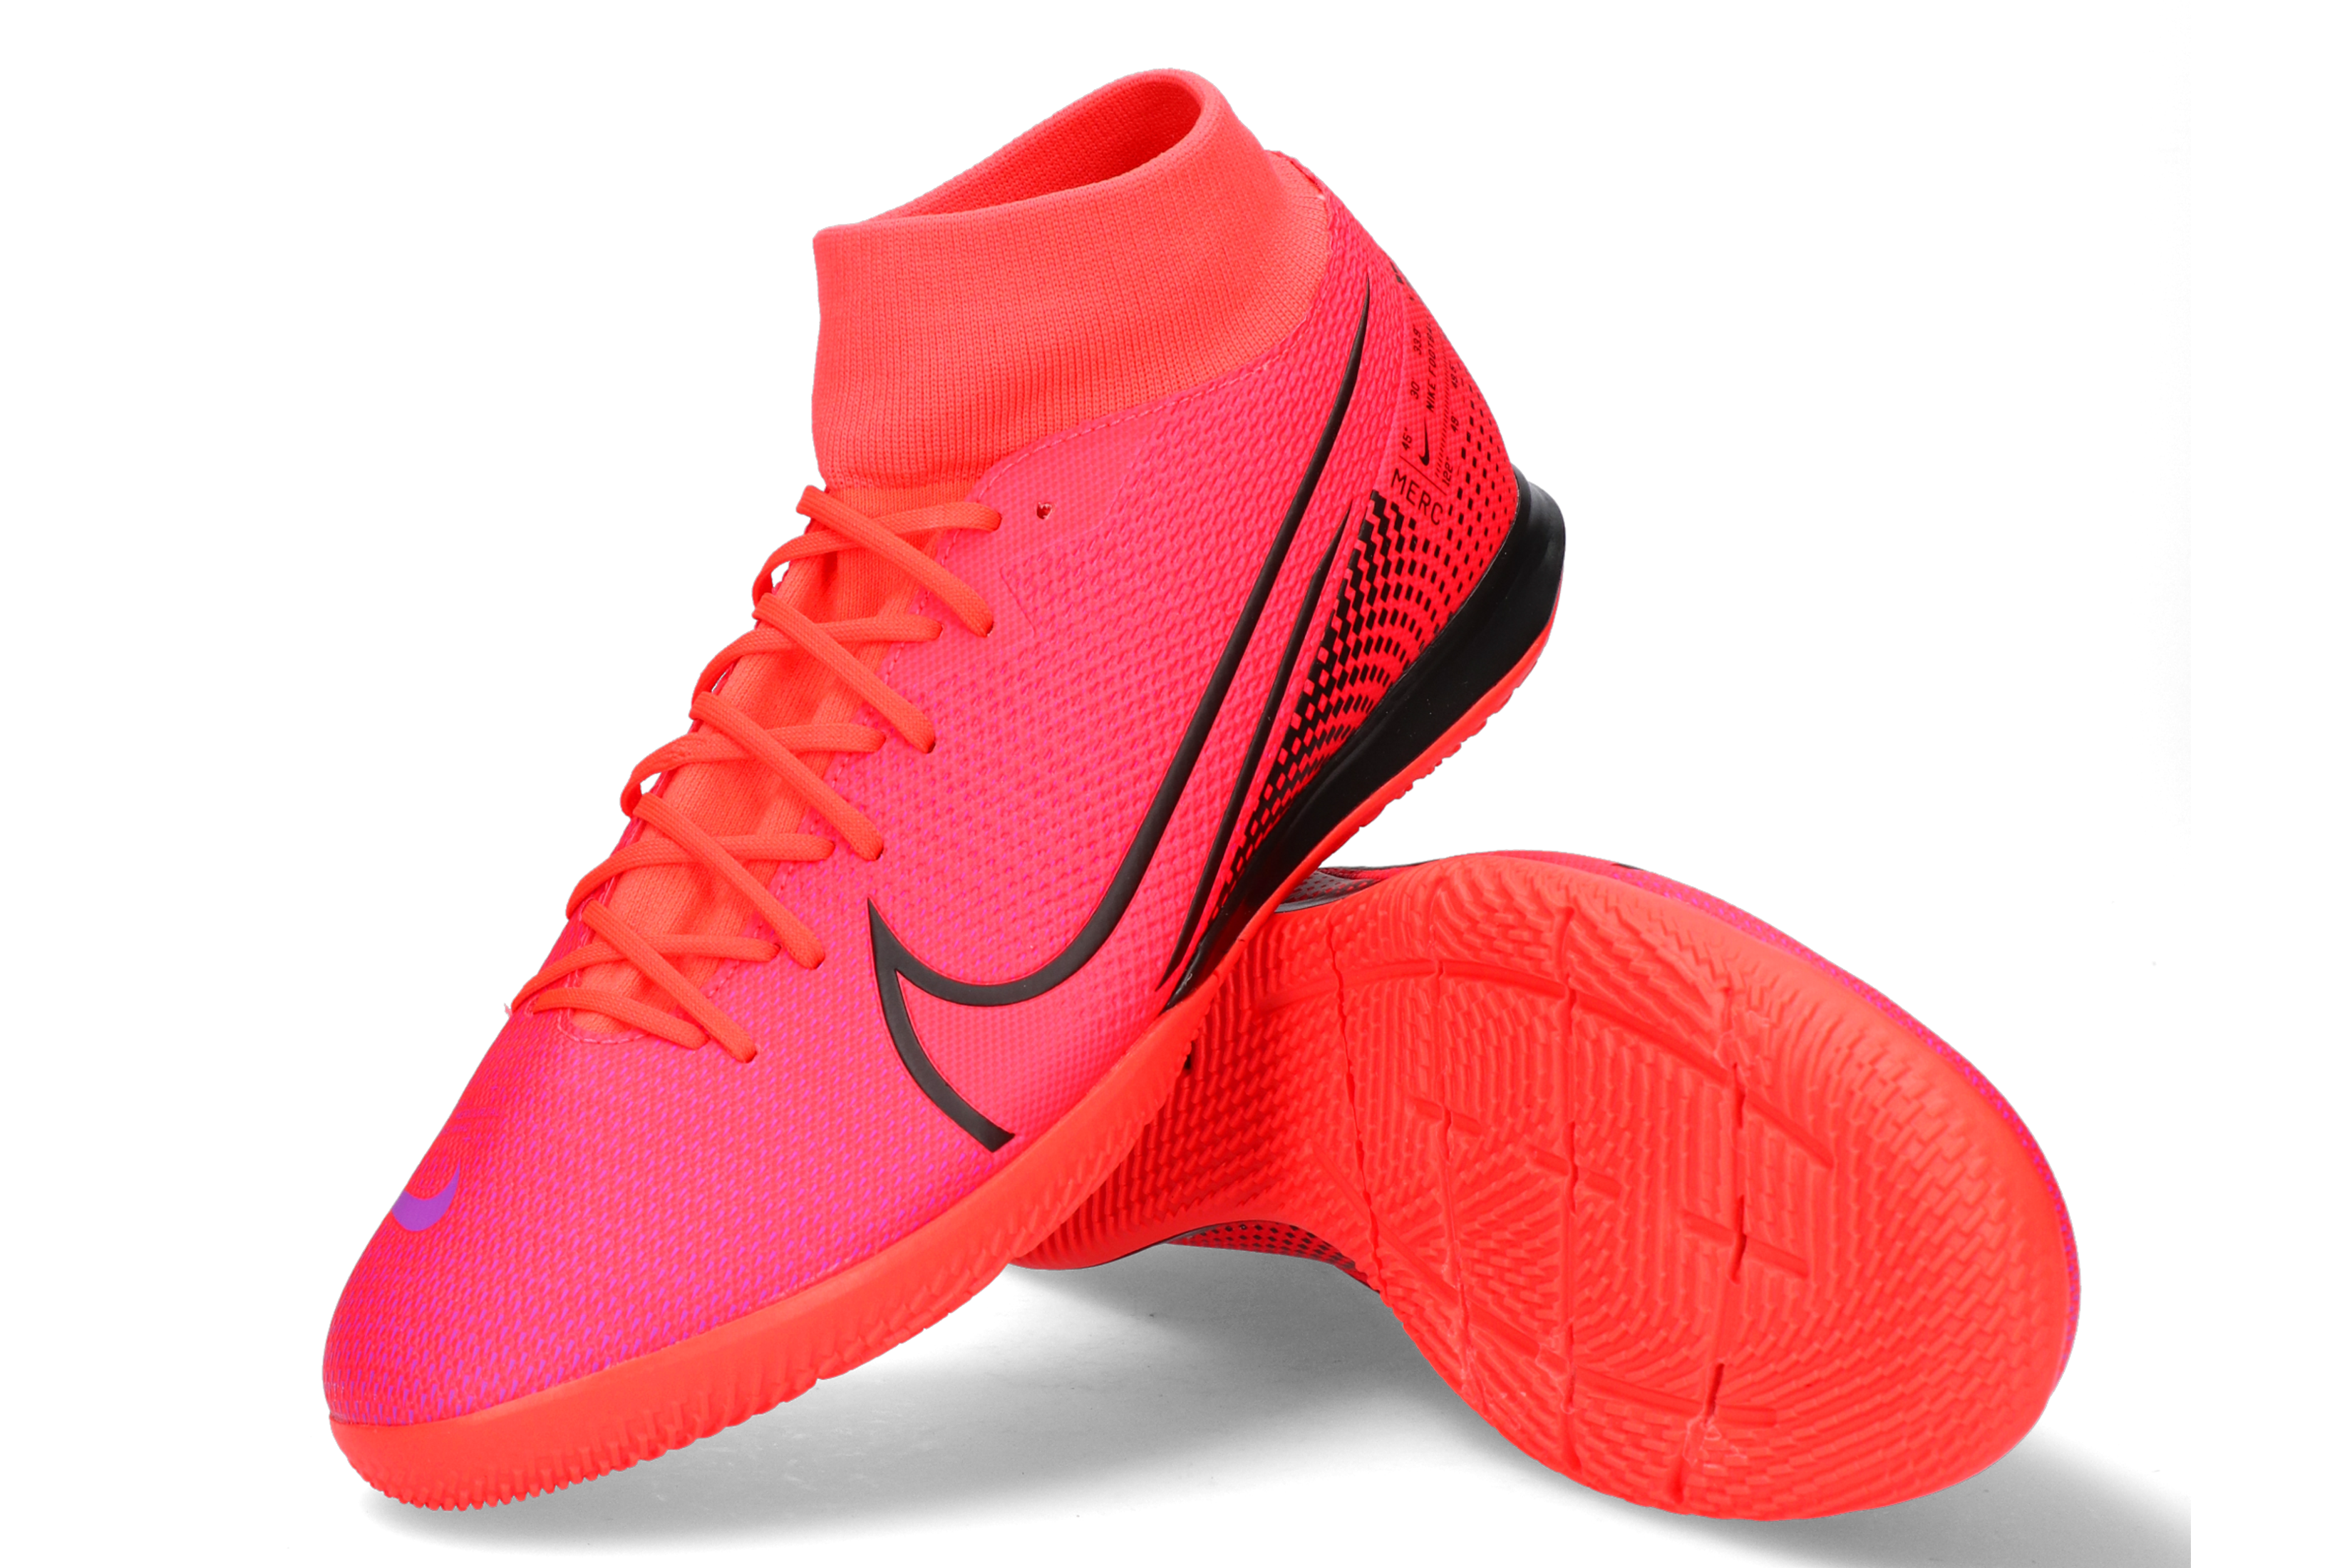 Nike Mercurial Superfly 7 Academy MDS IC Dream Speed.